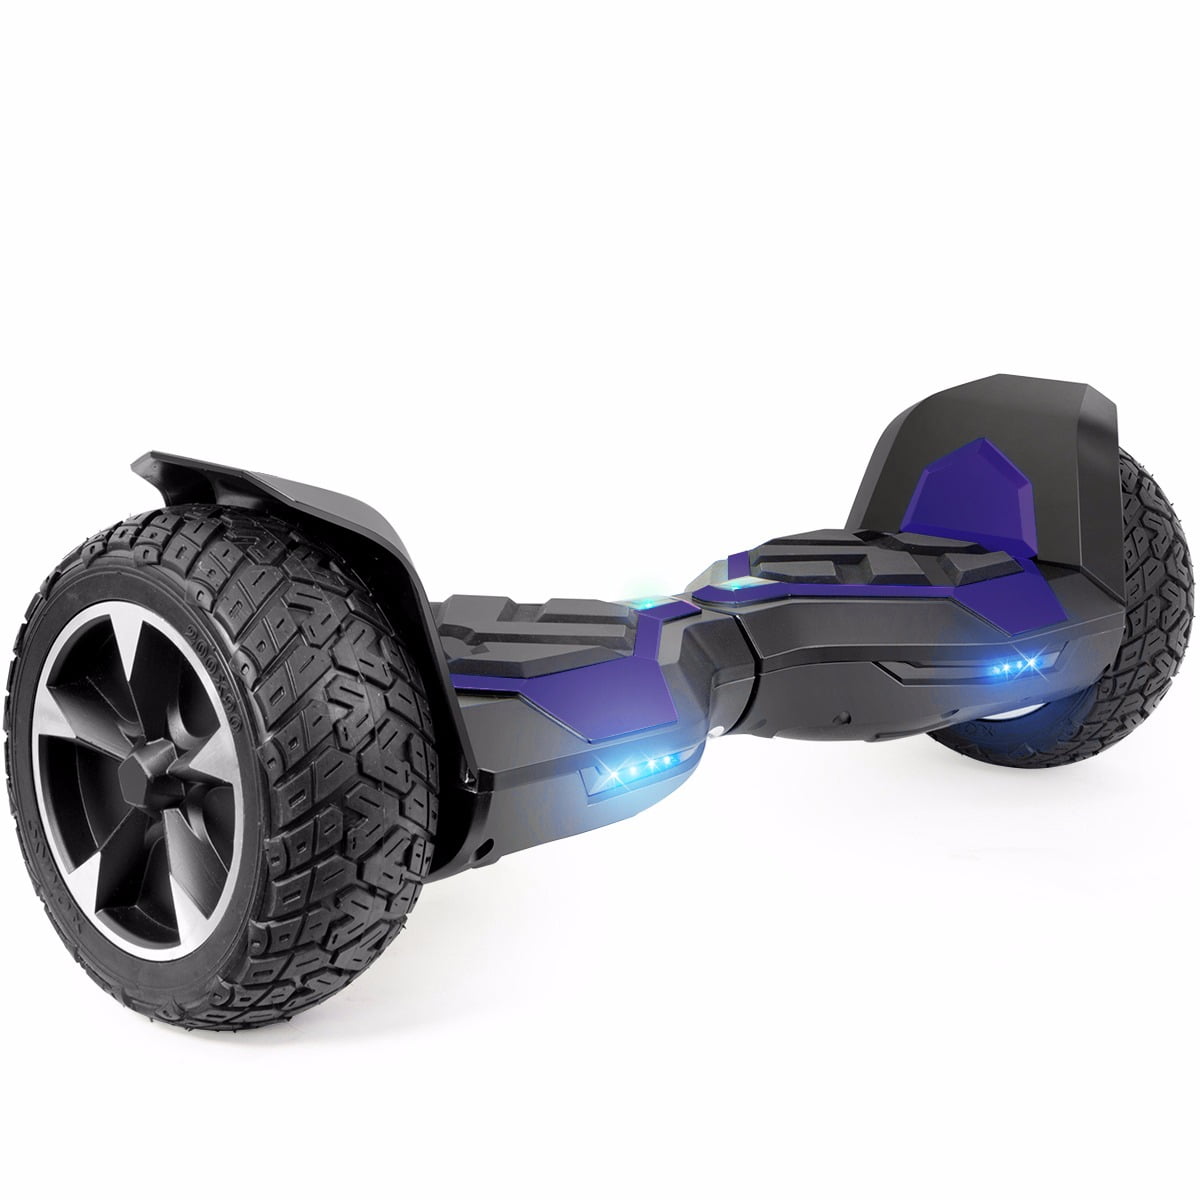 XtremepowerUS 8.5 Off Road Hoverboard w/Bluetooth Speaker and LED Light Wine Red 